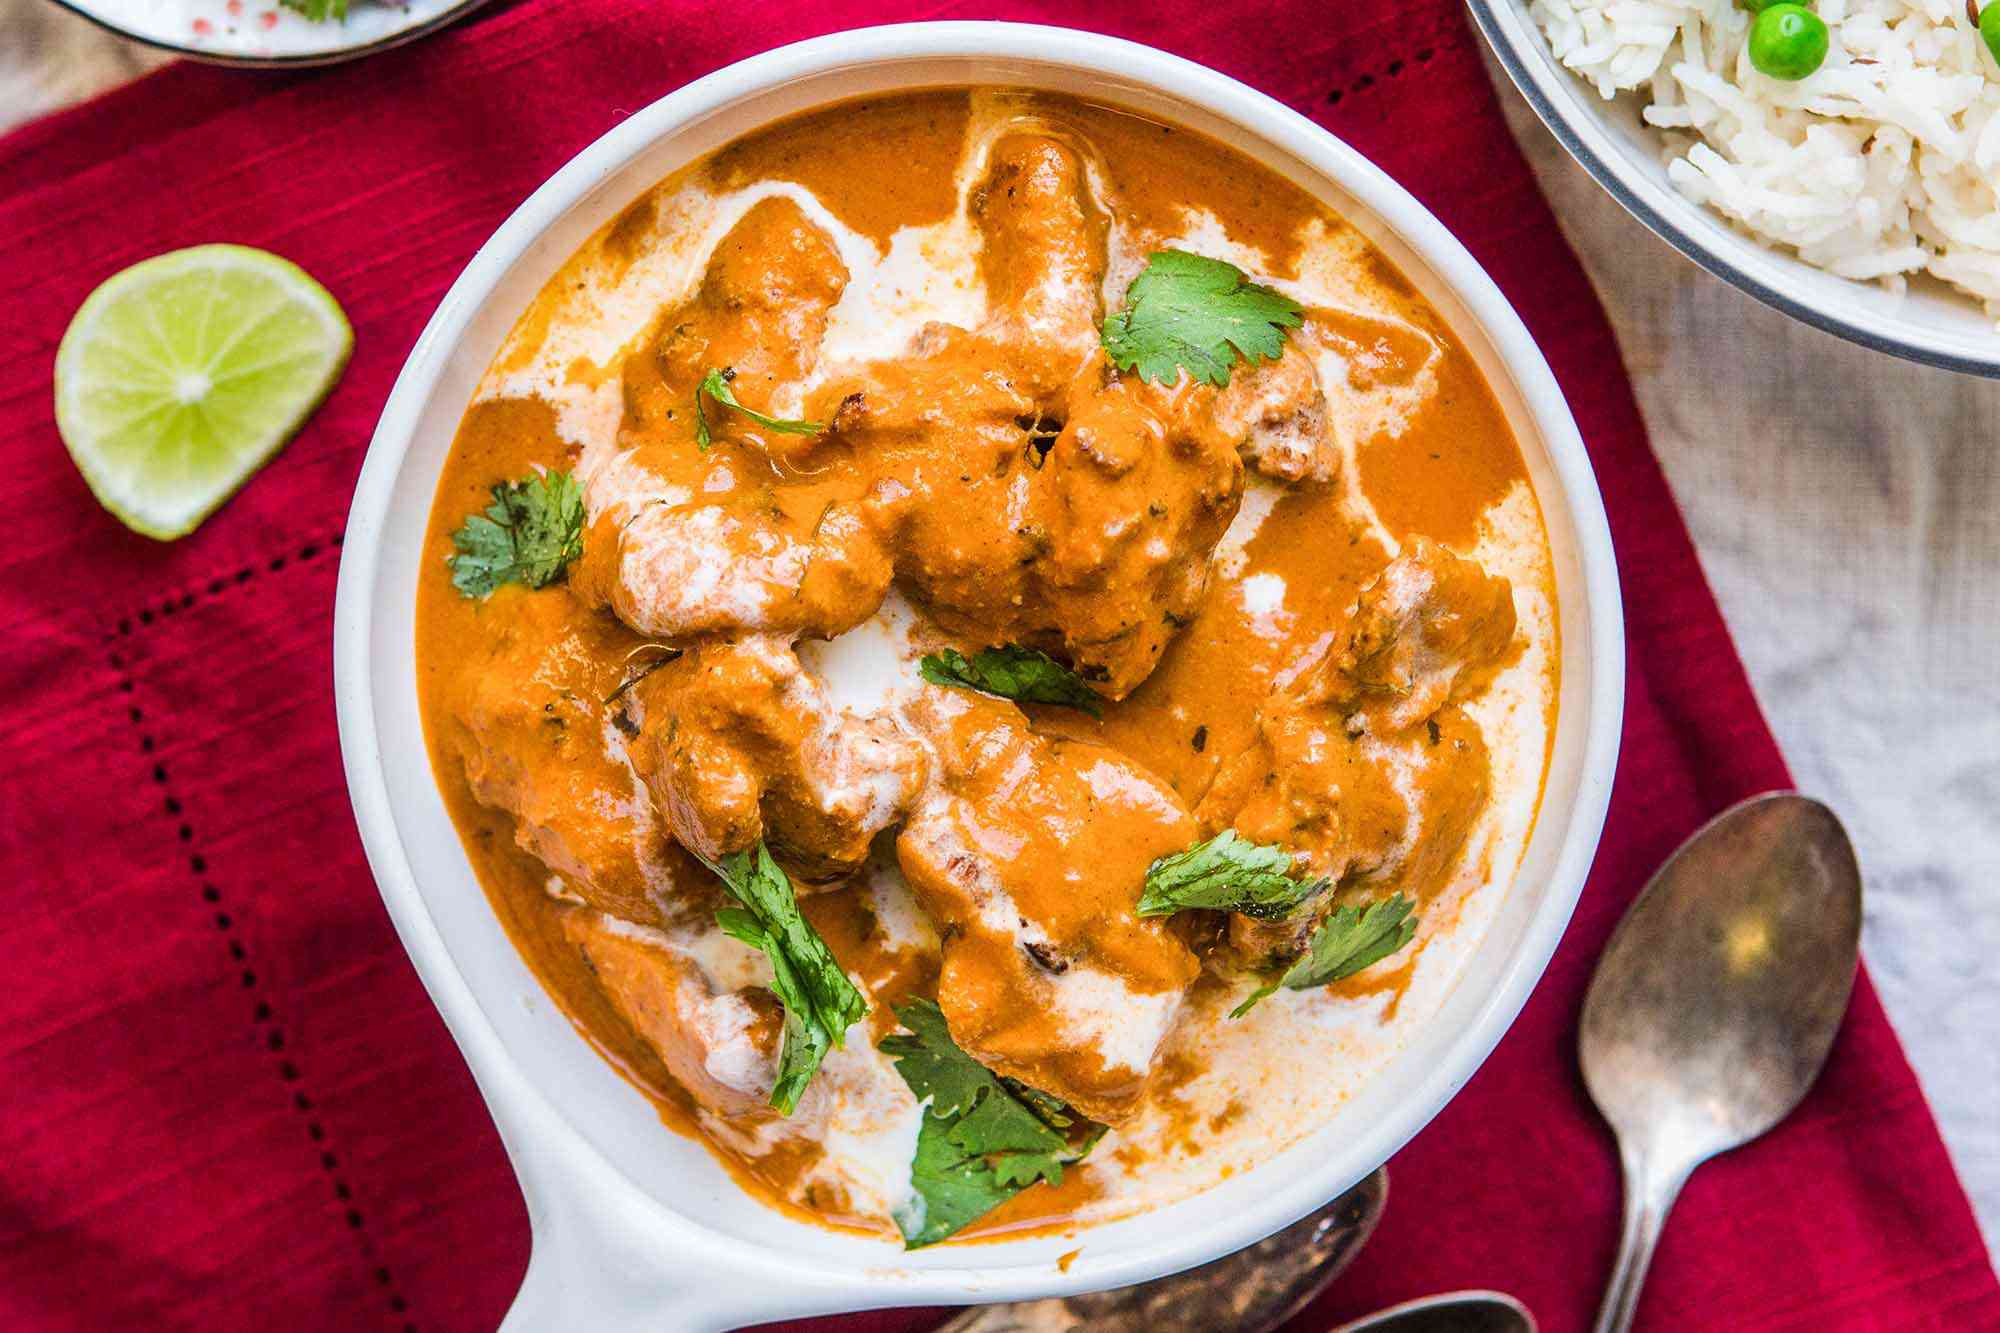 TrendMantra opt__aboutcom__coeus__resources__content_migration__simply_recipes__uploads__2019__01__Butter-Chicken-LEAD-2-6ca76f24bbe74114a09958073cb9c76f Complete List Of Popular Must Have Food Places In Delhi! This Needs To Be Saved & Shared  